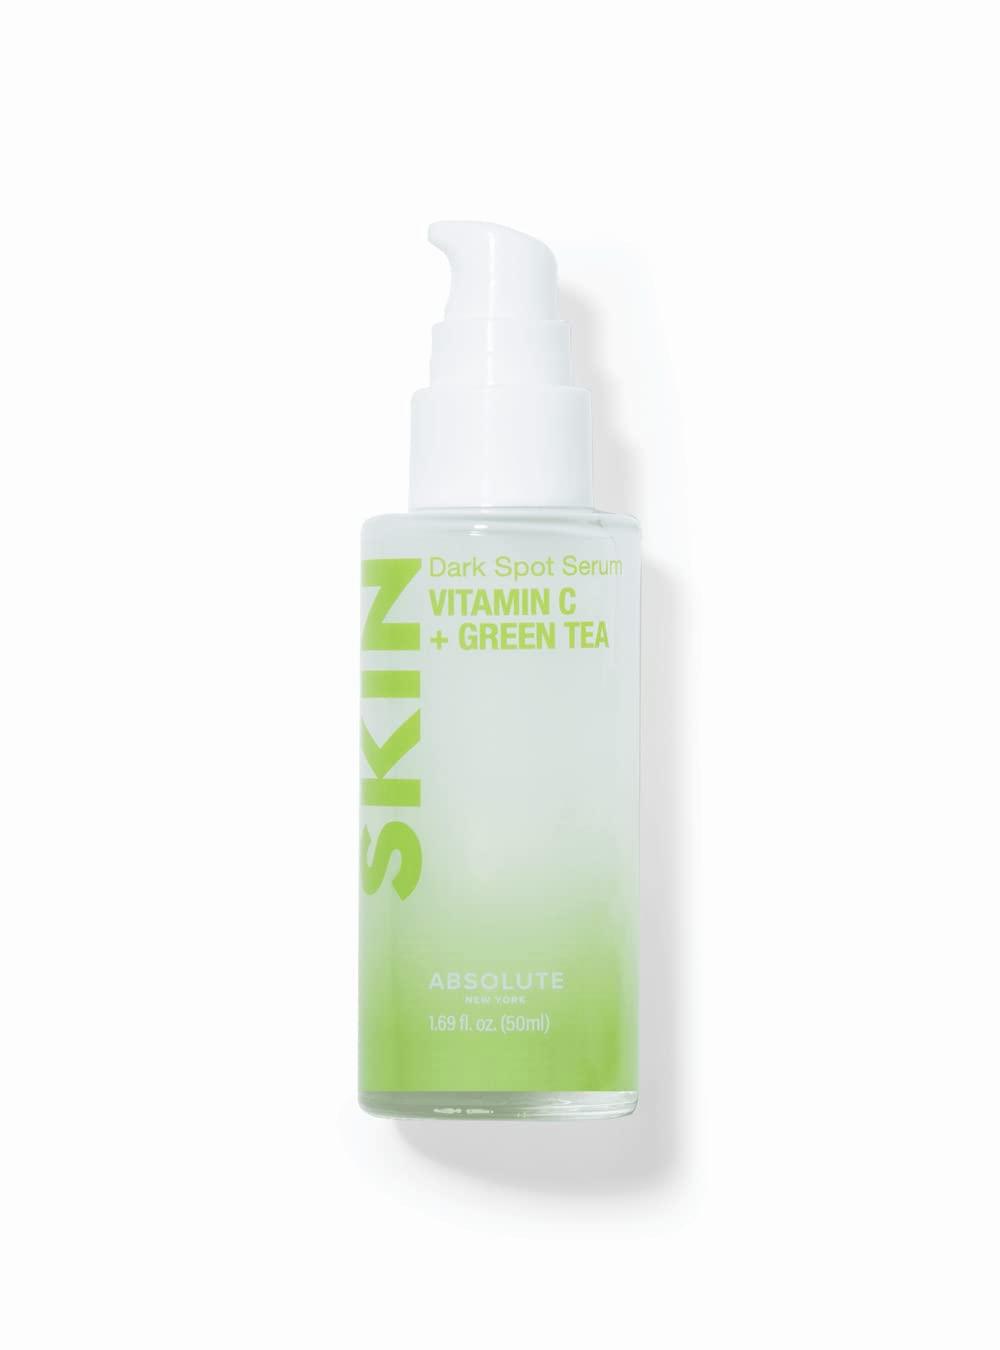 A green bottle of dark spot serum with a white lid.